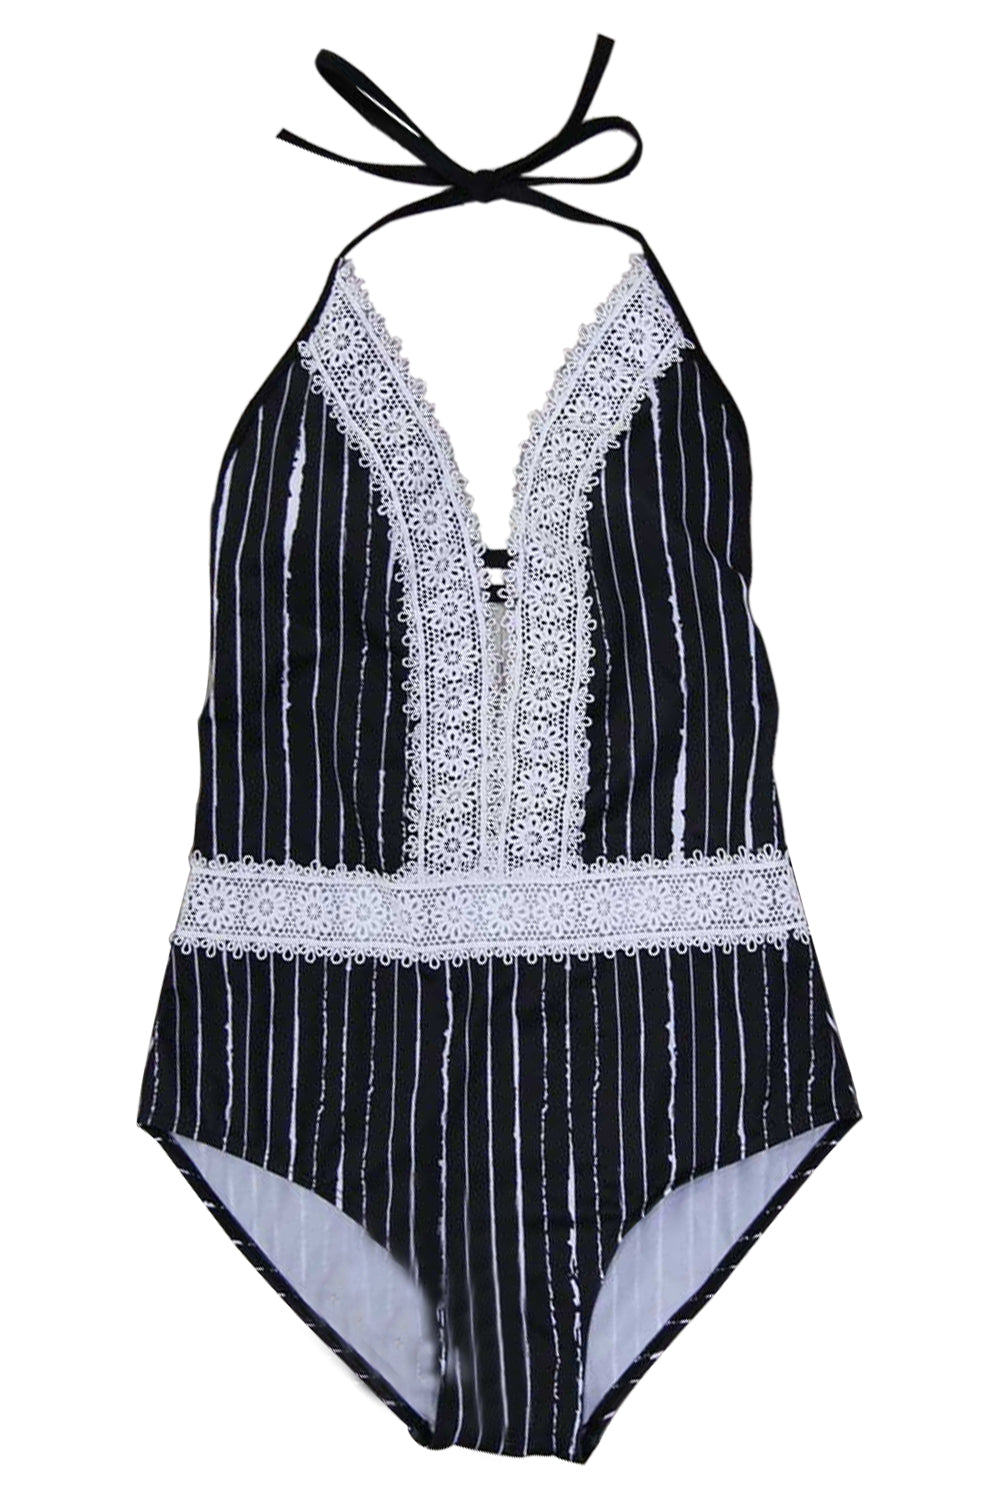 Iyasson White Lace Stripes One-piece Swimsuit